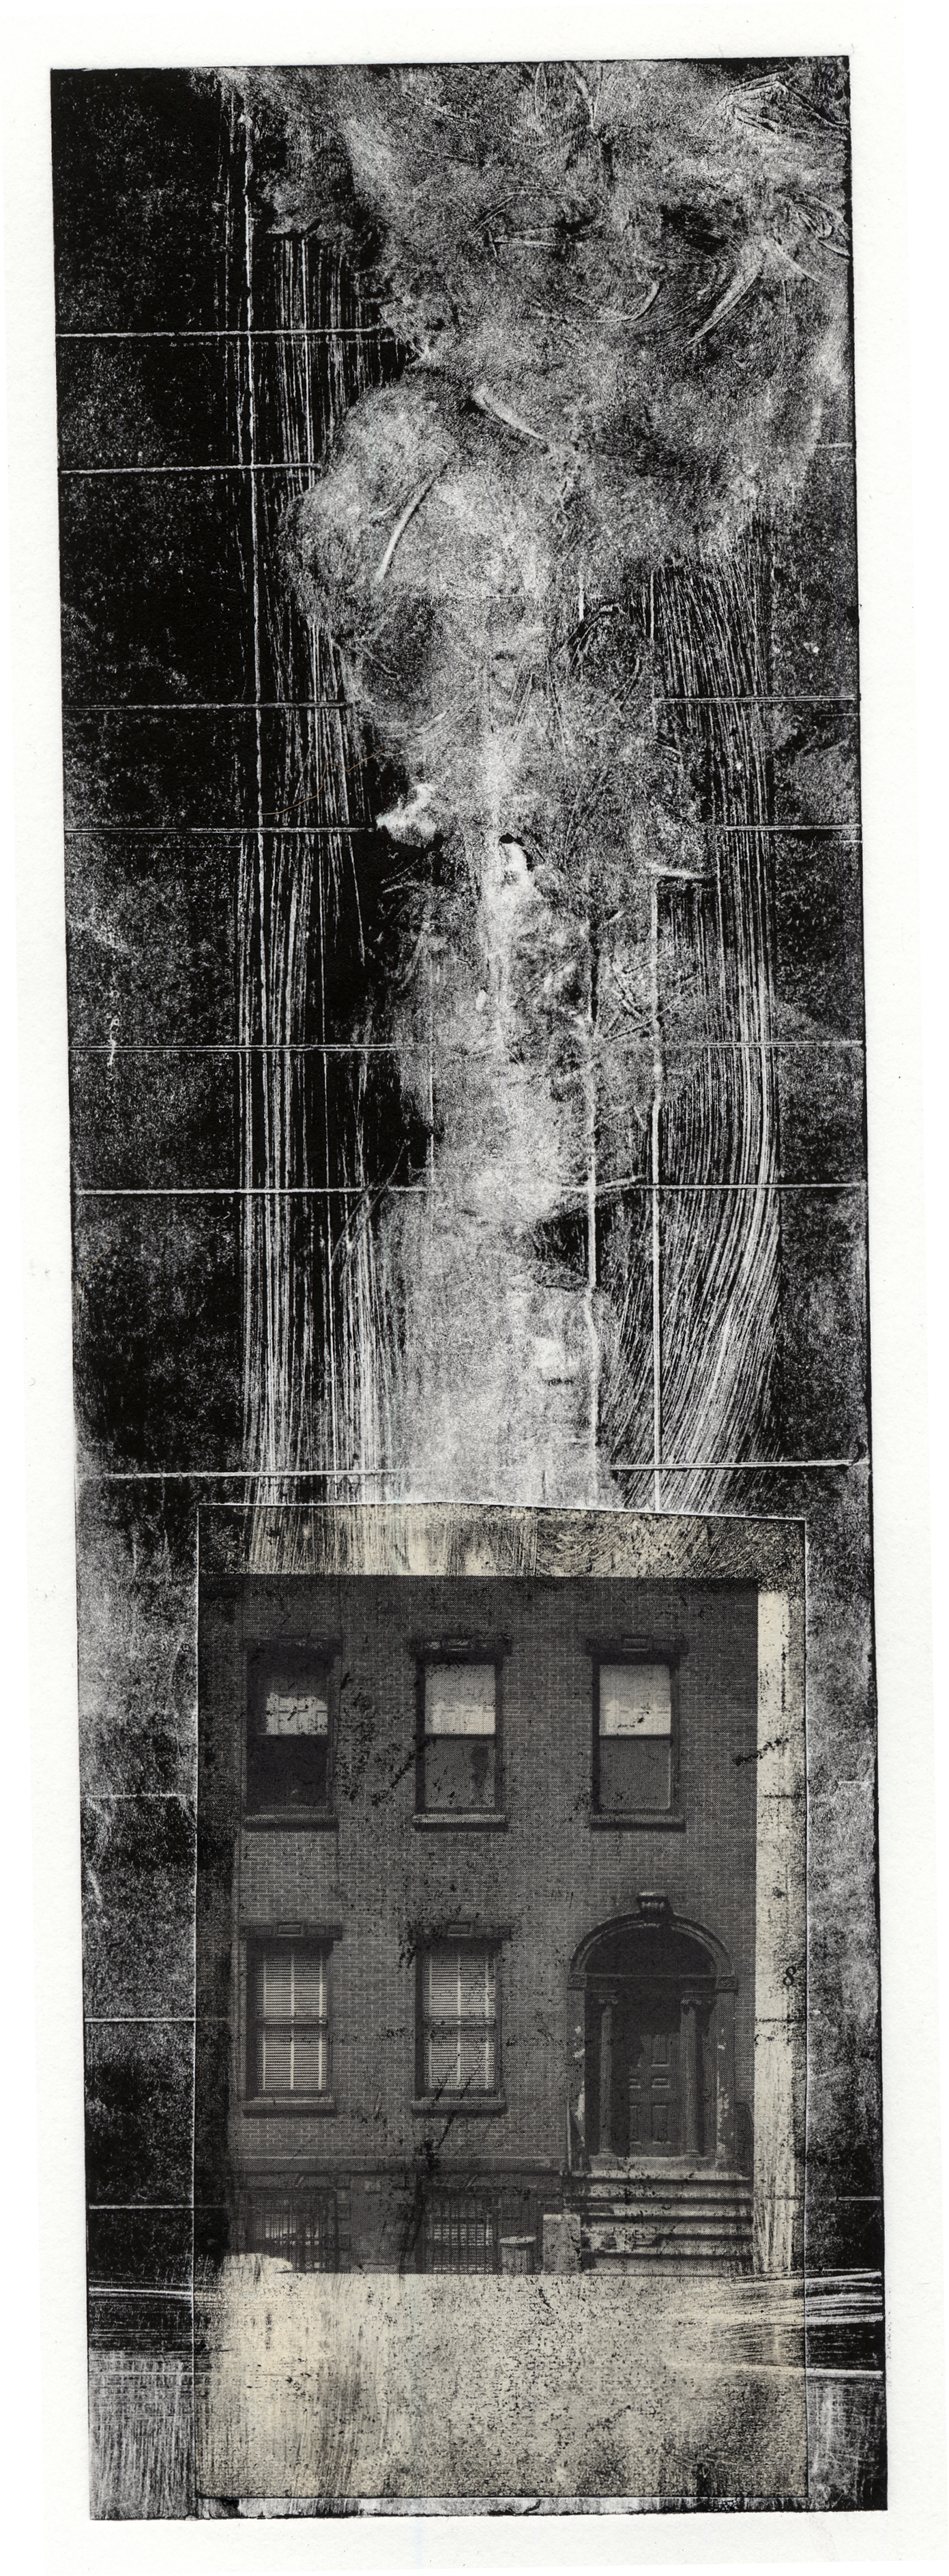  A monotype print with collage elements from Clive Knights' dwelling studies 